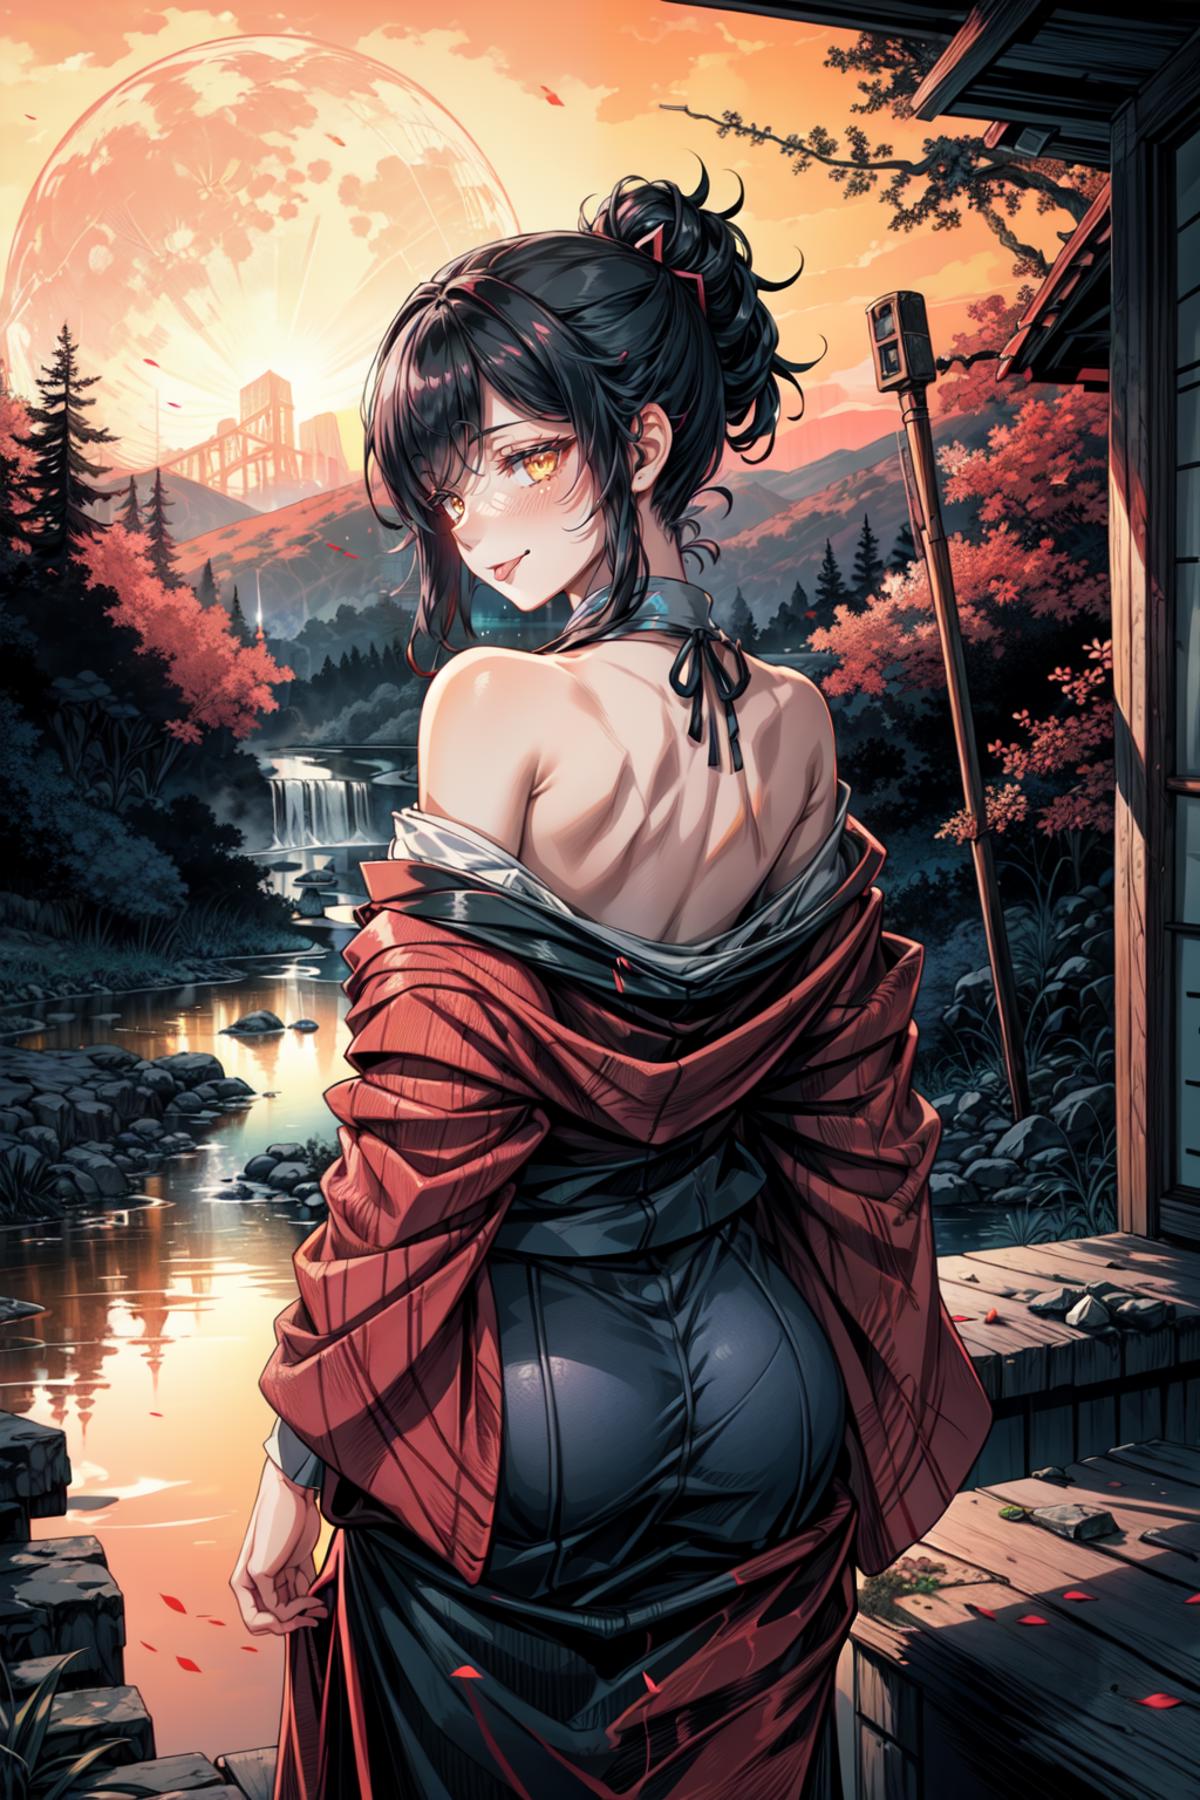 Anime girl standing next to water with a red shirt.